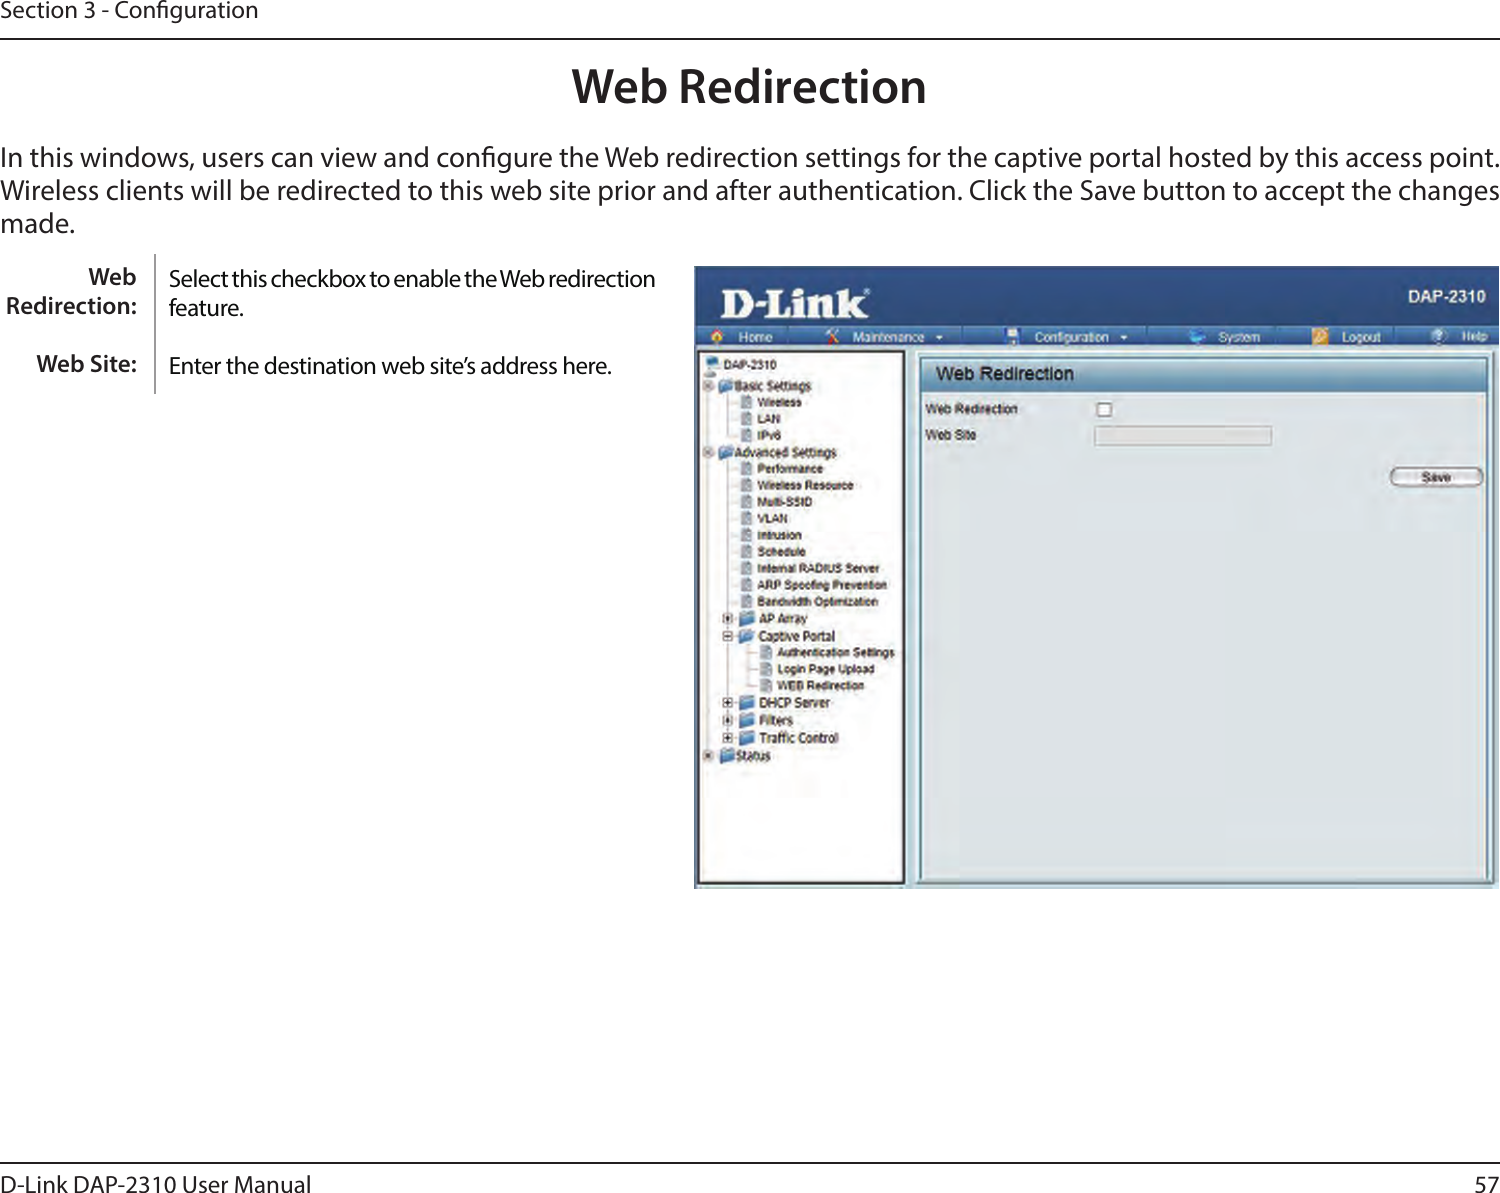 57D-Link DAP-2310 User ManualSection 3 - CongurationWeb RedirectionIn this windows, users can view and congure the Web redirection settings for the captive portal hosted by this access point. Wireless clients will be redirected to this web site prior and after authentication. Click the Save button to accept the changes made.Select this checkbox to enable the Web redirection feature.Enter the destination web site’s address here.Web Redirection:Web Site: